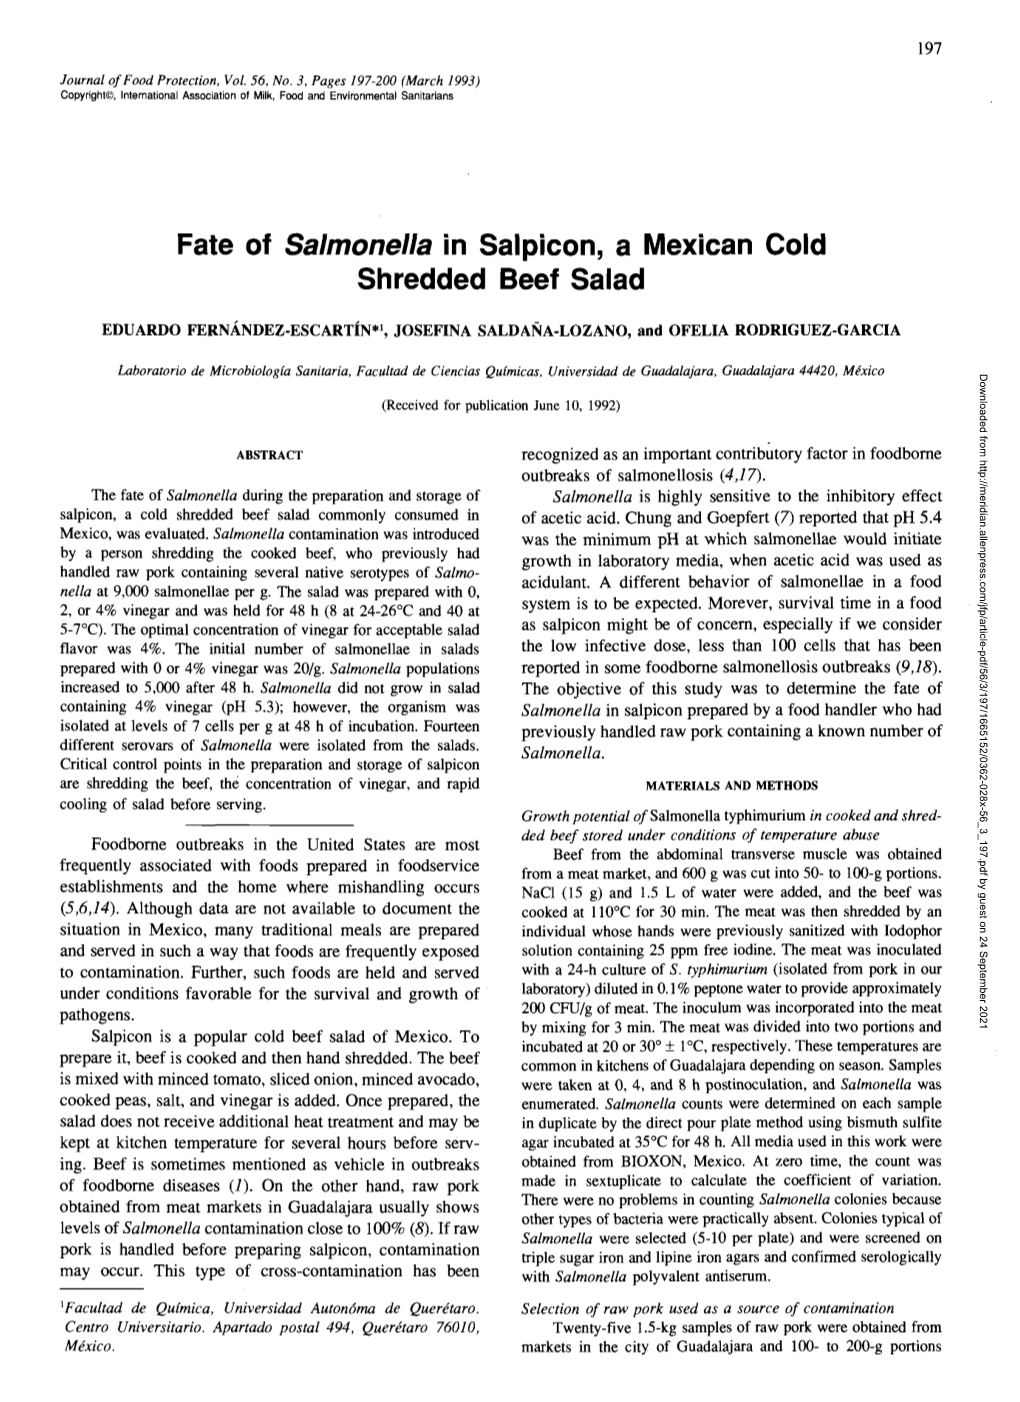 Fate of Salmonella in Salpicon, a Mexican Cold Shredded Beef Salad